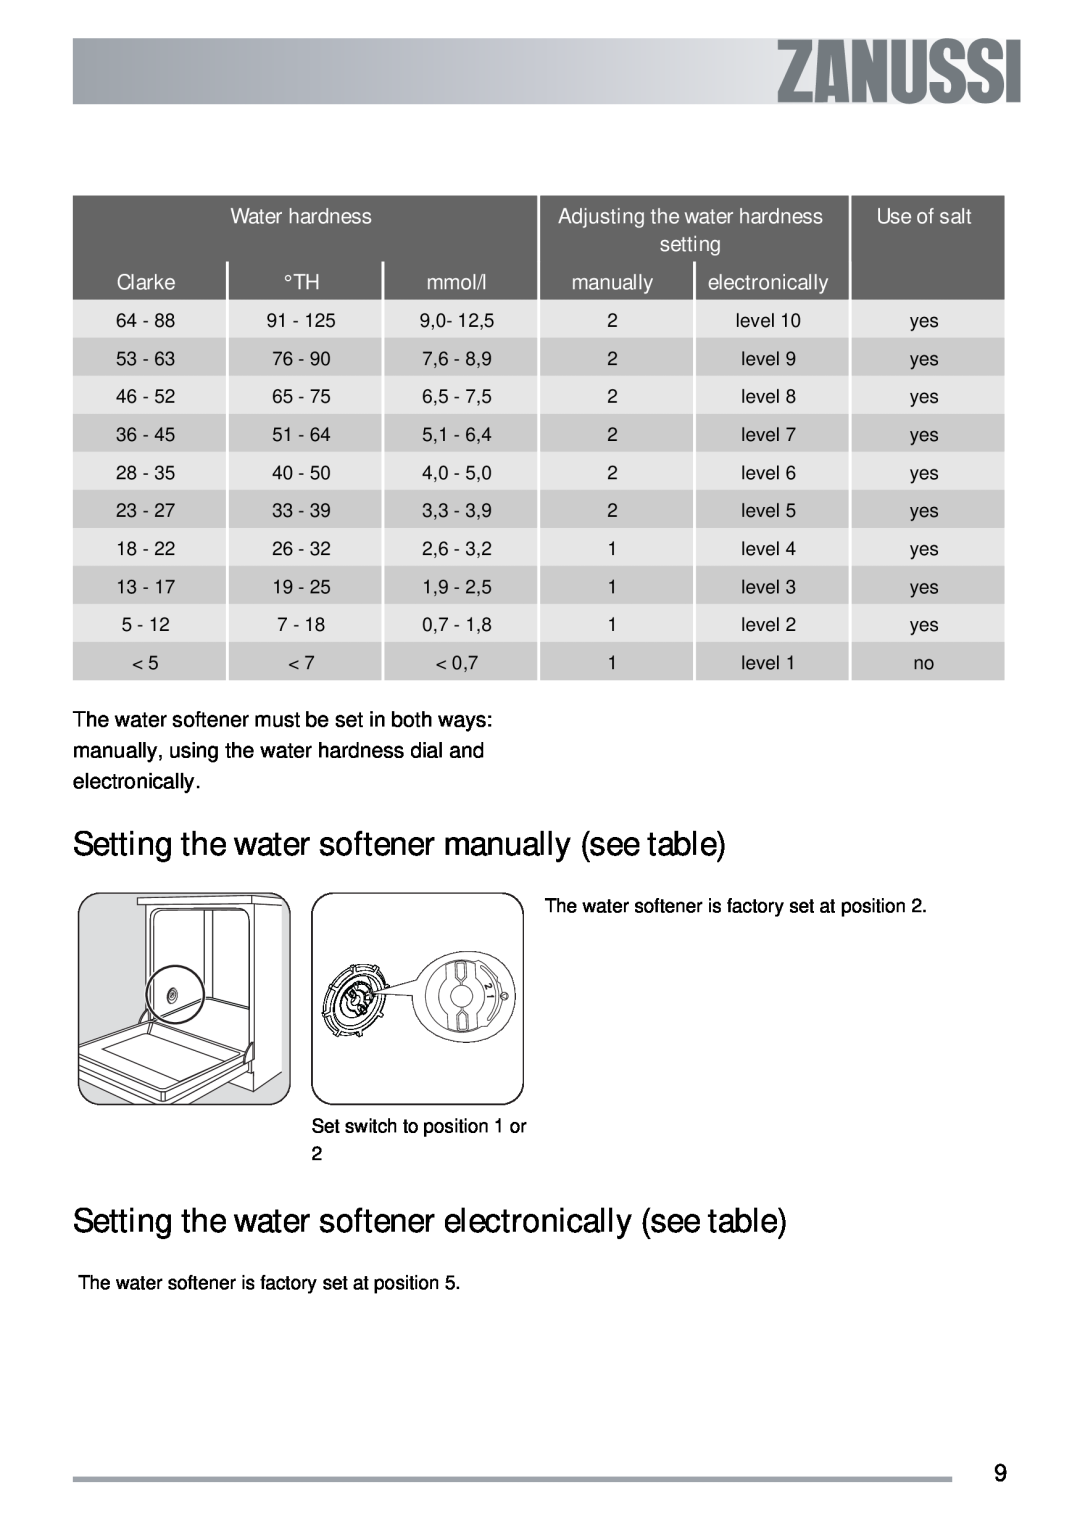 Zanussi ZDTS 101 user manual Setting the water softener manually see table, Water hardness, Clarke, mmol/l, electronically 